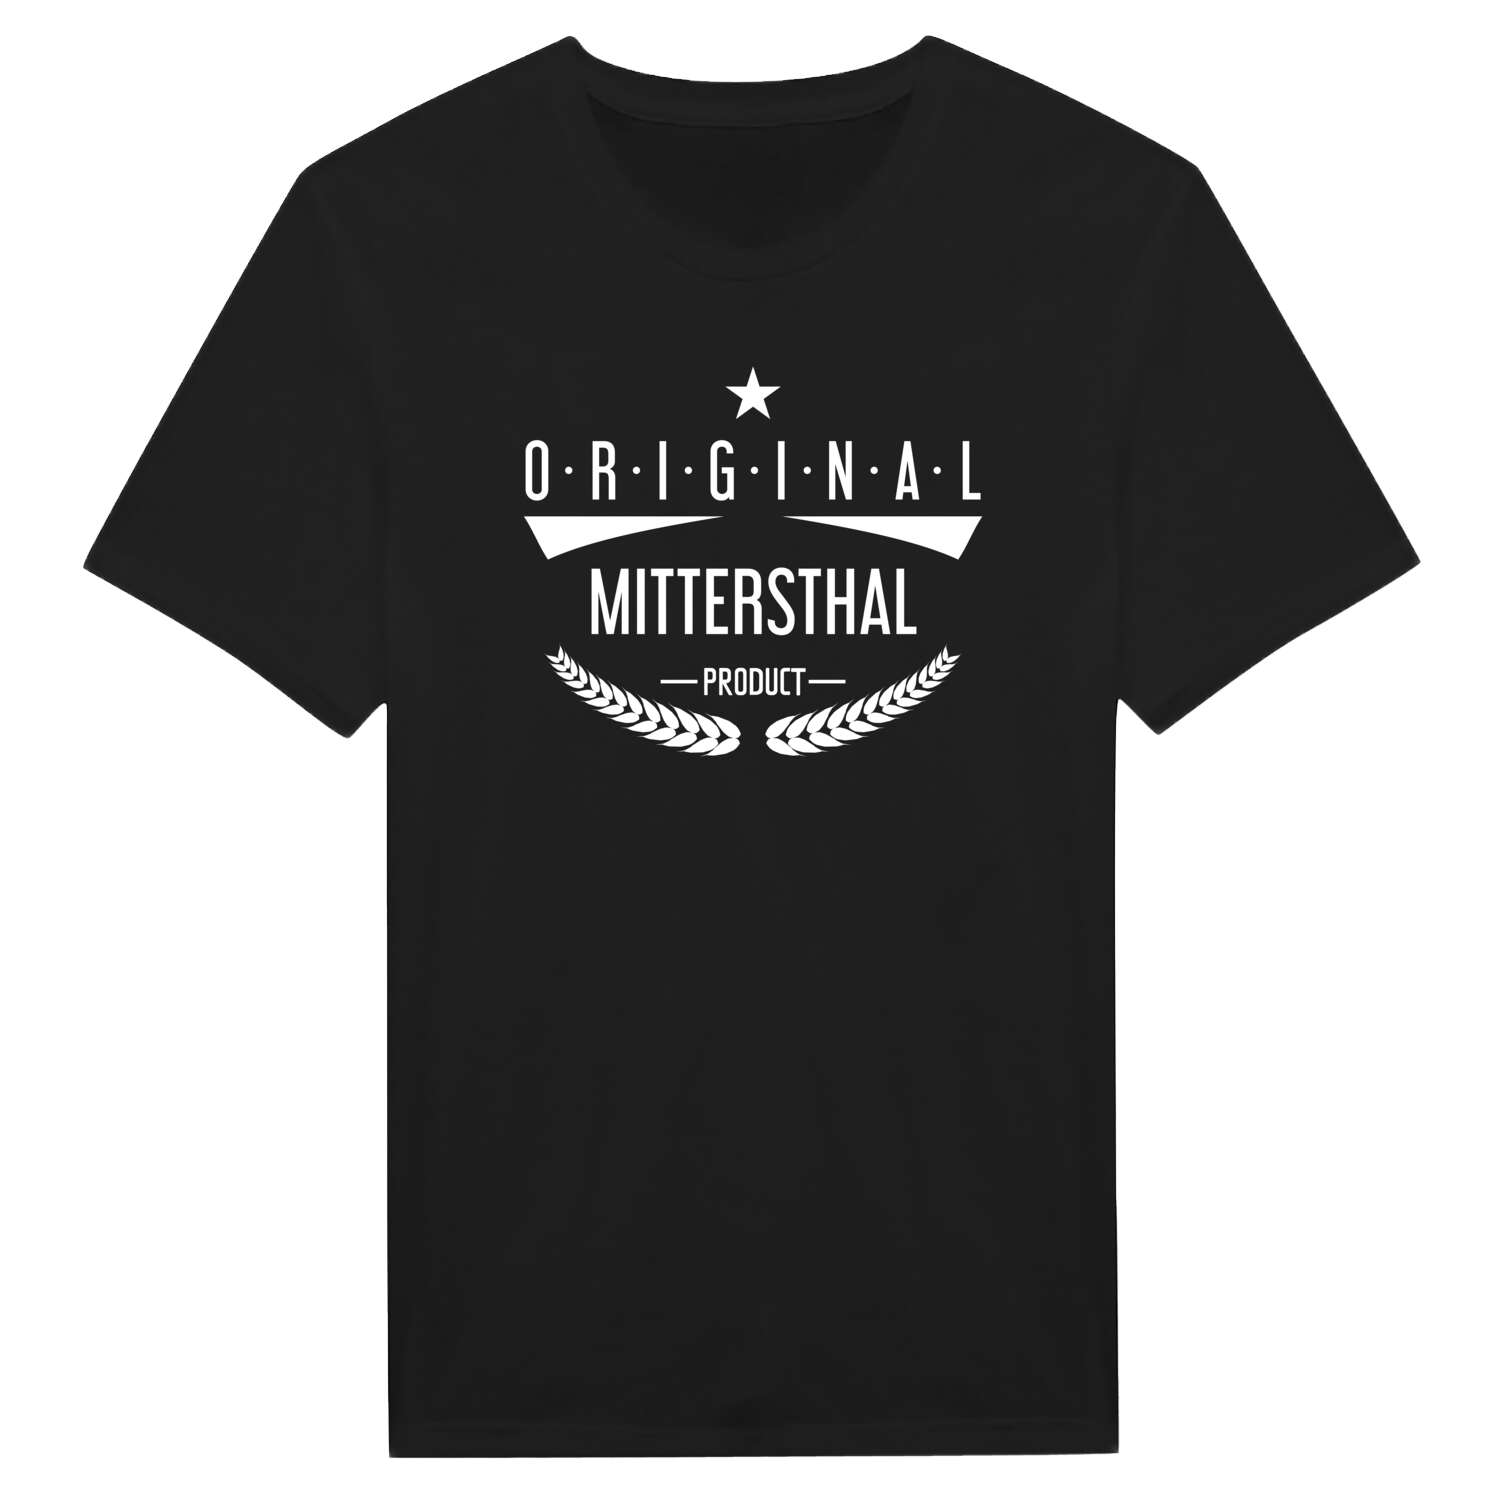 Mittersthal T-Shirt »Original Product«